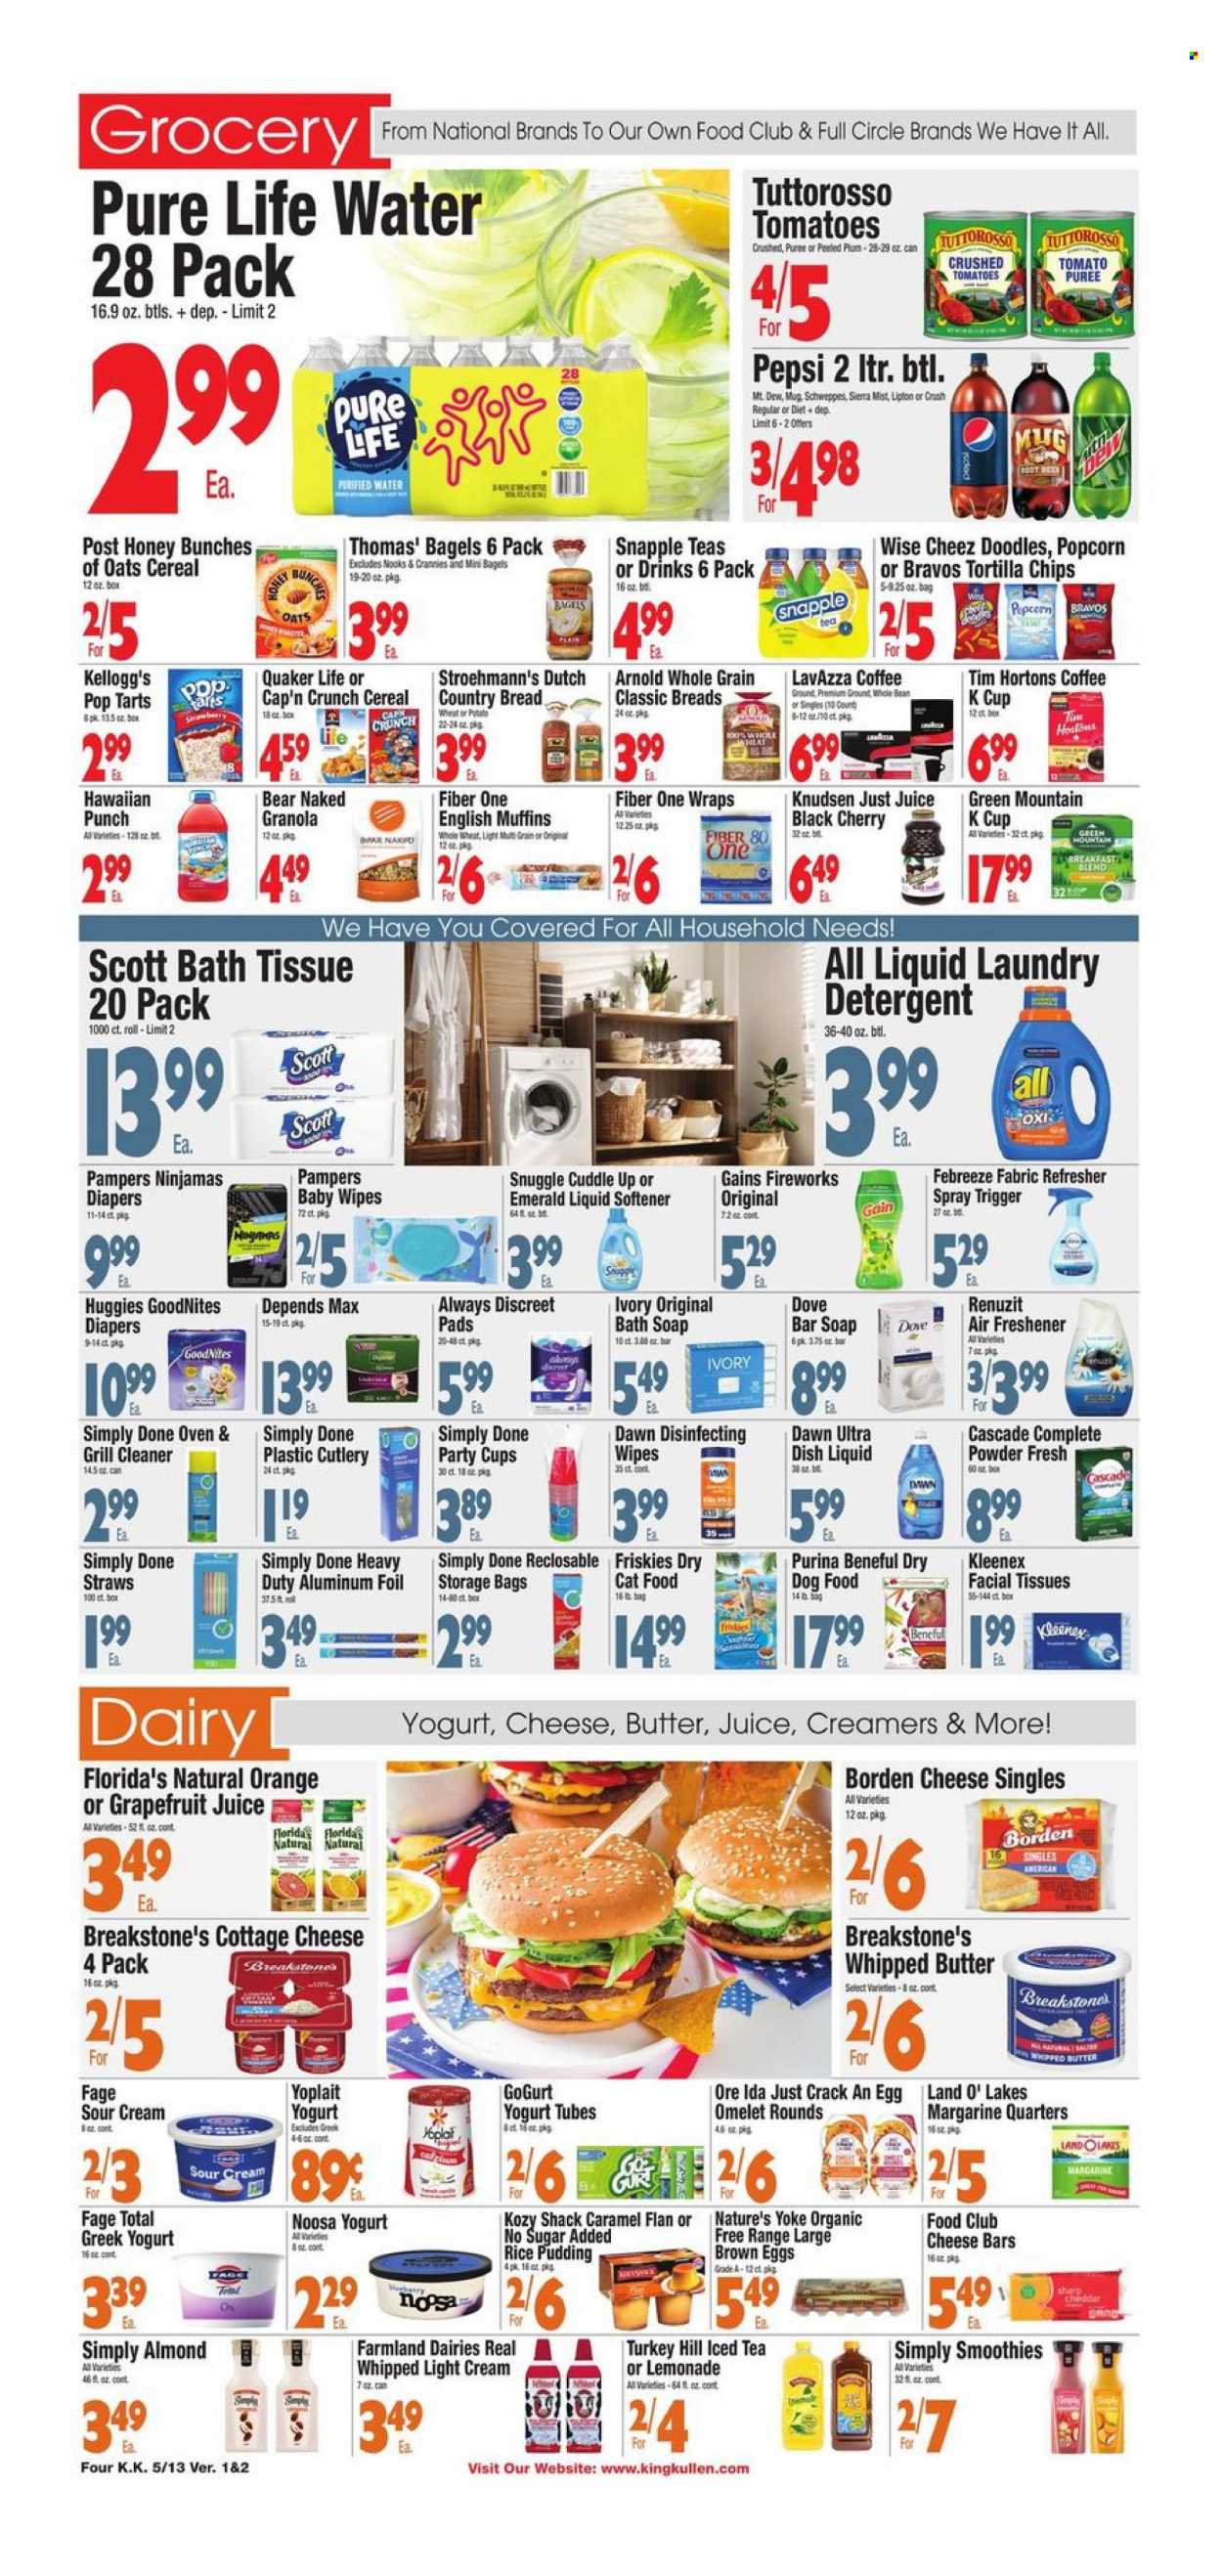 thumbnail - King Kullen Flyer - 05/13/2022 - 05/19/2022 - Sales products - bagels, english muffins, wraps, tomatoes, cherries, oranges, Quaker, cottage cheese, cheese, greek yoghurt, yoghurt, Yoplait, rice pudding, margarine, whipped butter, sour cream, Ore-Ida, Kellogg's, Pop-Tarts, Florida's Natural, tortilla chips, chips, popcorn, crushed tomatoes, tomato sauce, tomato puree, cereals, granola, Cap'n Crunch, Fiber One, caramel, lemonade, Schweppes, Pepsi, juice, Lipton, ice tea, Snapple, Sierra Mist, smoothie, purified water, Pure Life Water, coffee, coffee capsules, K-Cups, Lavazza, Green Mountain, wipes, Huggies, Pampers, baby wipes, nappies, Dove, bath tissue, Kleenex, Scott, detergent, Gain, cleaner, Cascade, Snuggle, fabric softener, laundry detergent, dishwashing liquid, soap bar, soap, sanitary pads, Always Discreet, facial tissues, refresher, aluminium foil, storage bag, Renuzit, air freshener, animal food, dry dog food, cat food, dog food, Purina, dry cat food, Friskies. Page 4.